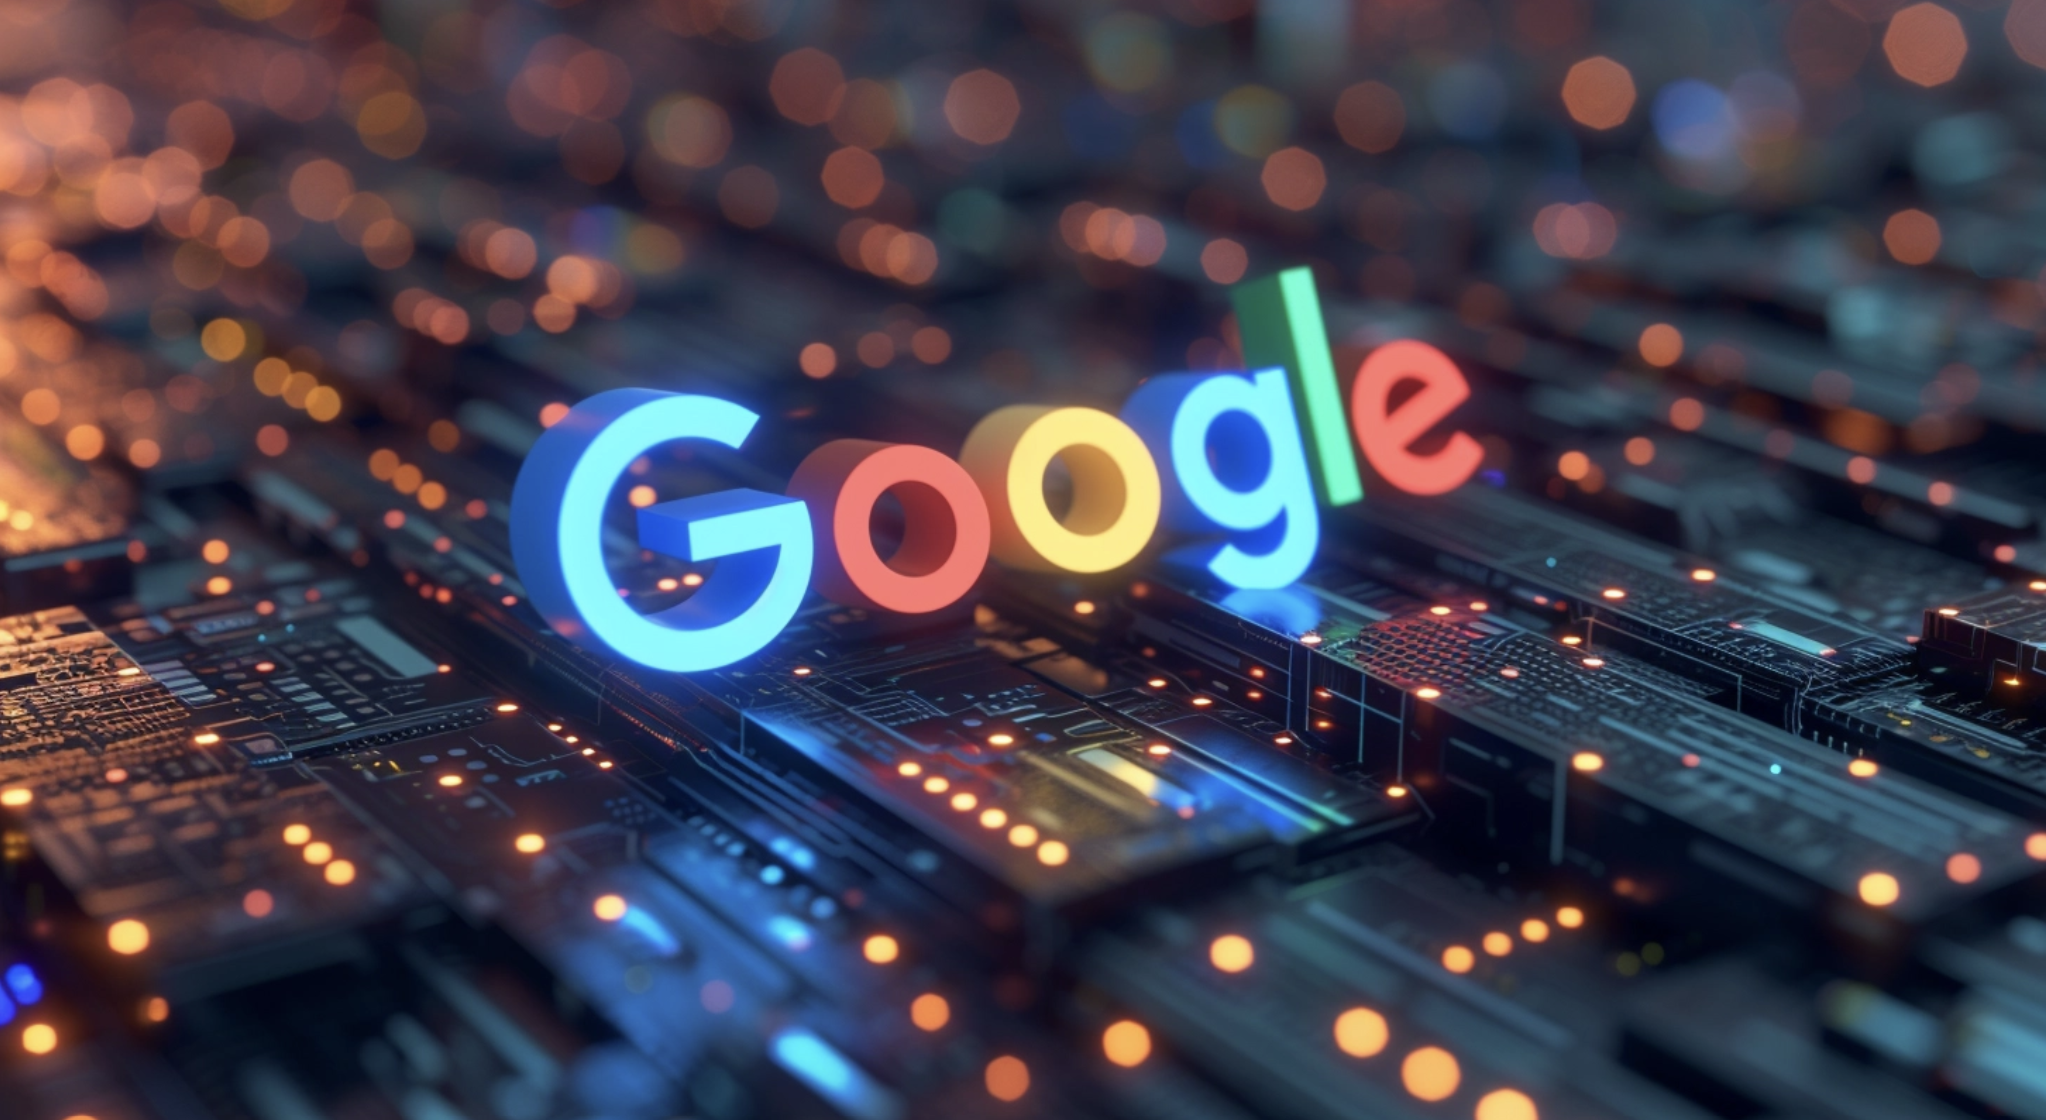 Google, US clash over search advertising as trial winds down